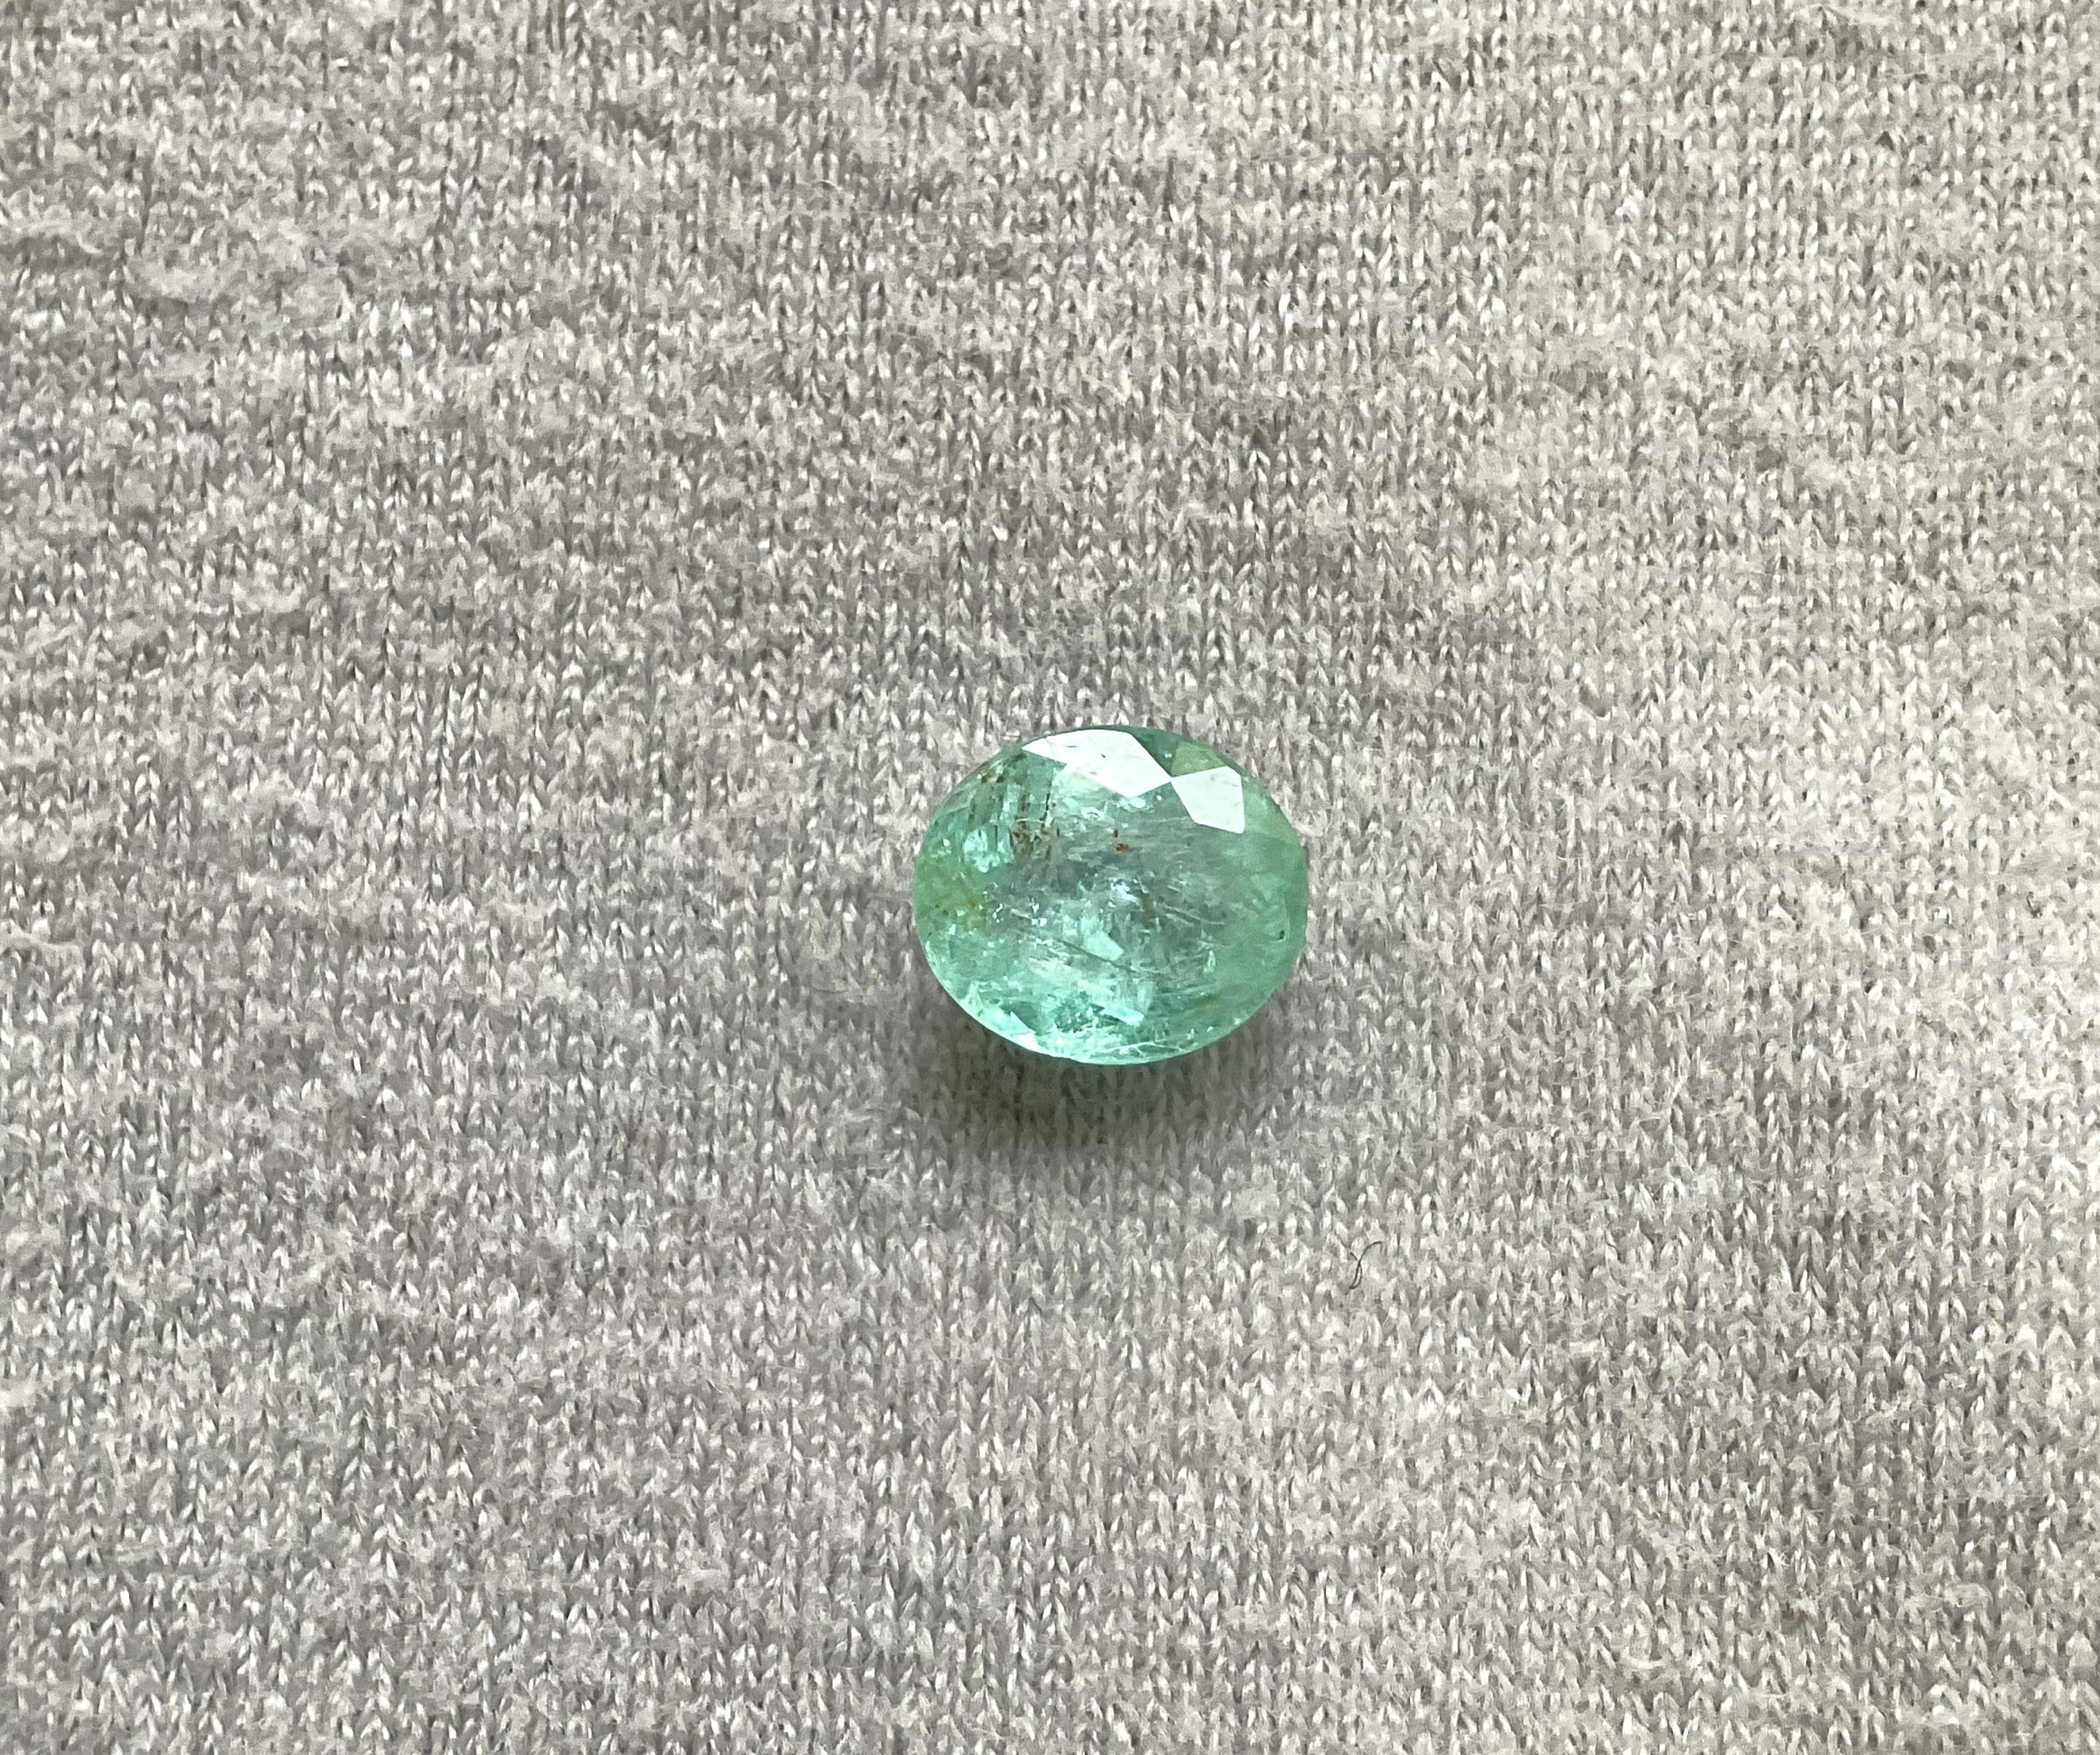 Certified 2.24 Carats Blue Paraiba Tourmaline Oval Cut Stone for Fine Jewelry In New Condition For Sale In Jaipur, RJ